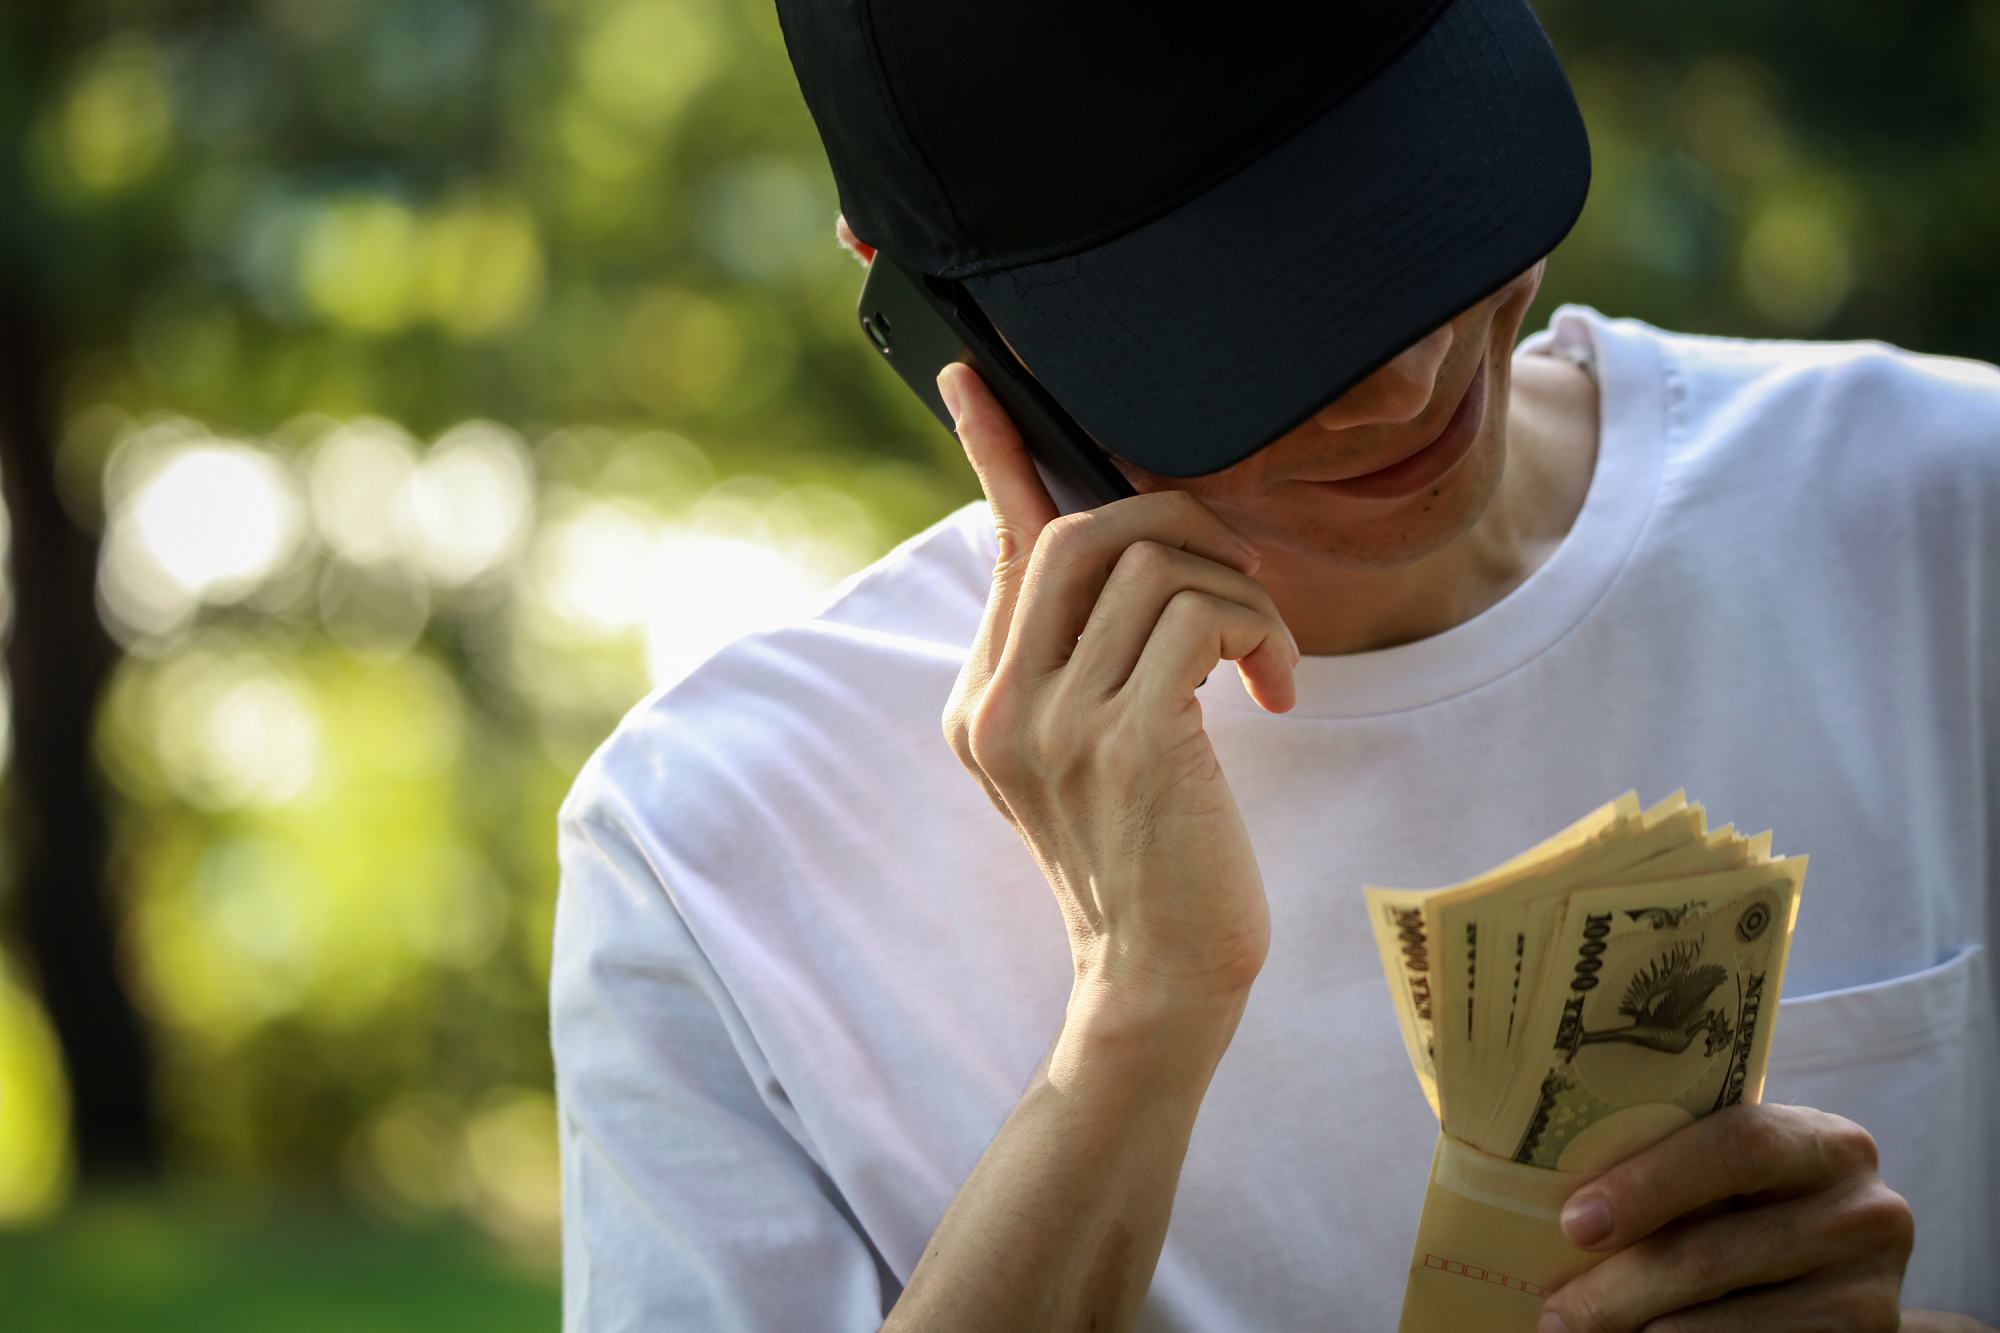 A young man talks on a mobile phone while looking at an envelope filled with Japanese banknotes.